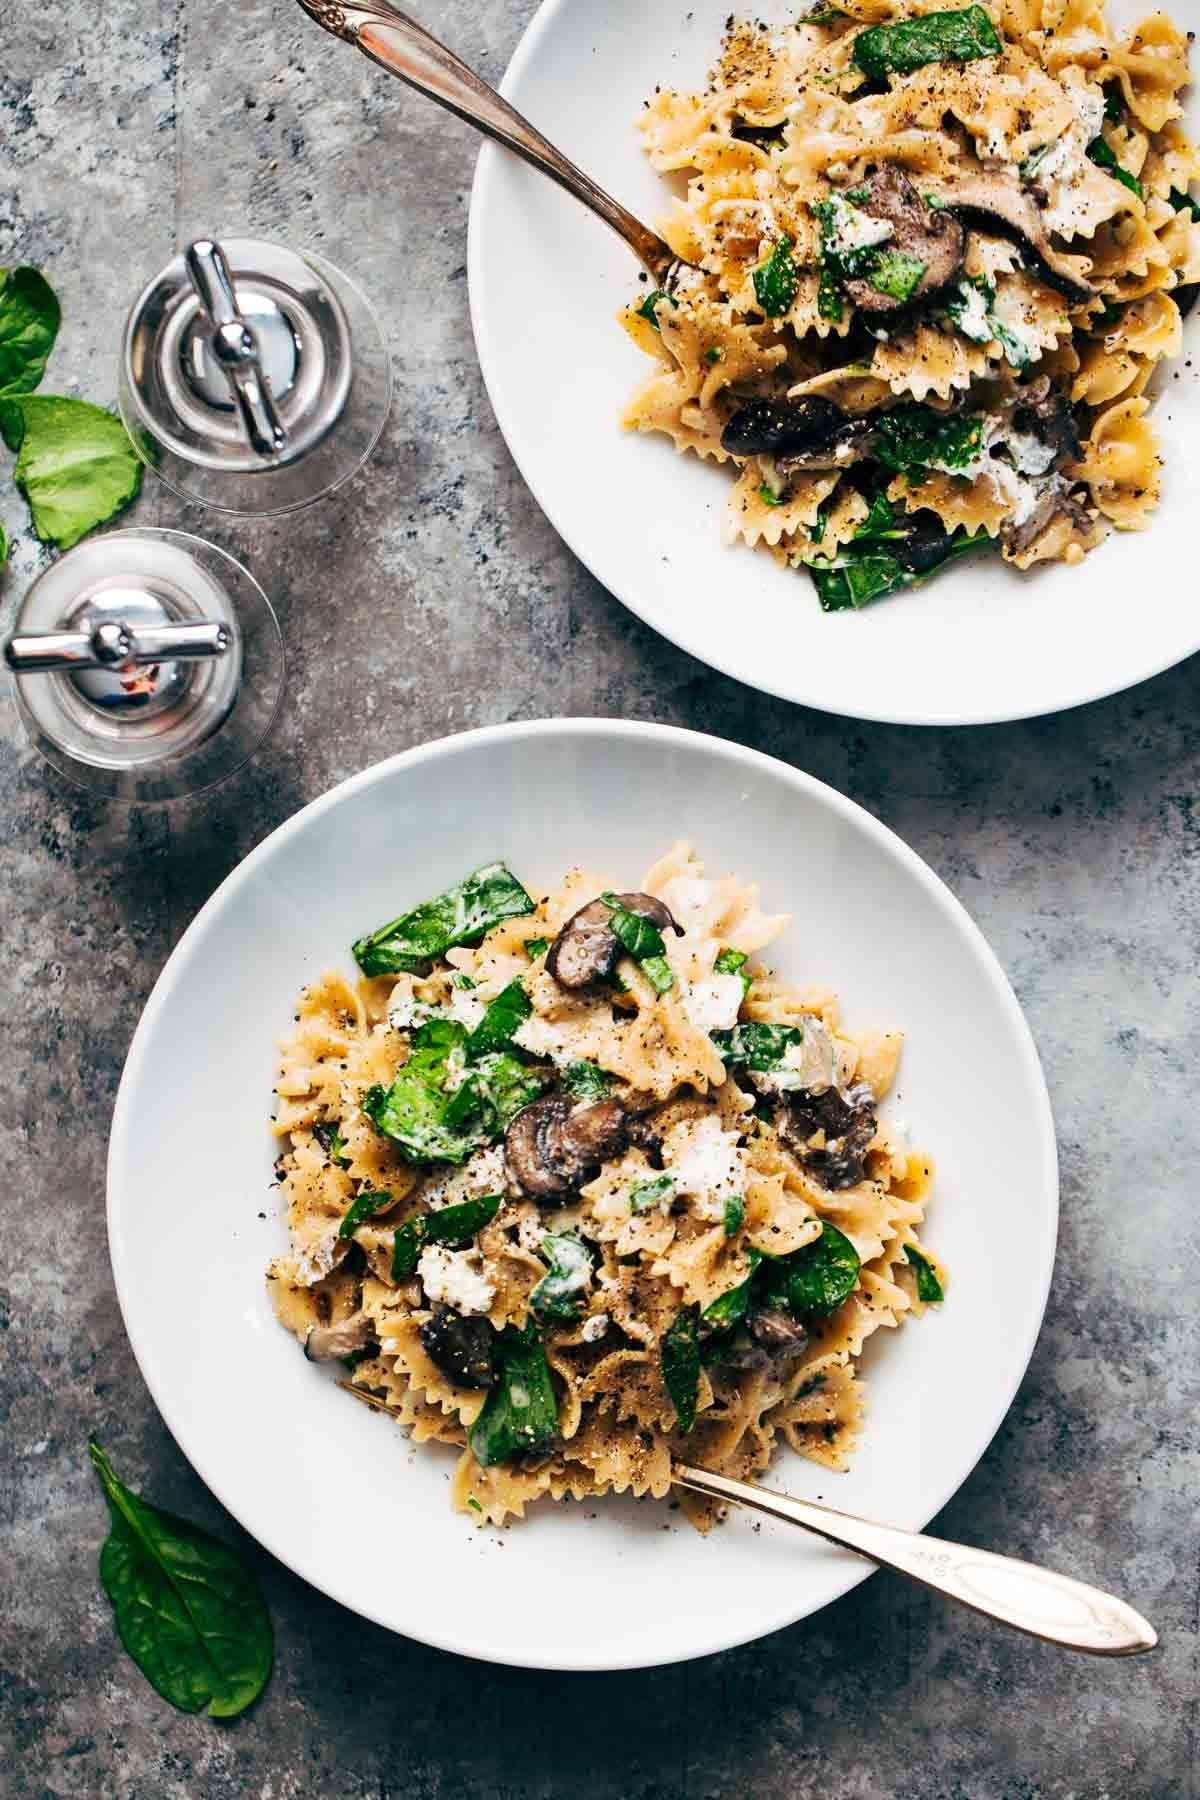 10 Amazing Vegetarian Dinner Ideas For Two date night mushroom pasta with goat cheese recipe pinch of yum 2022